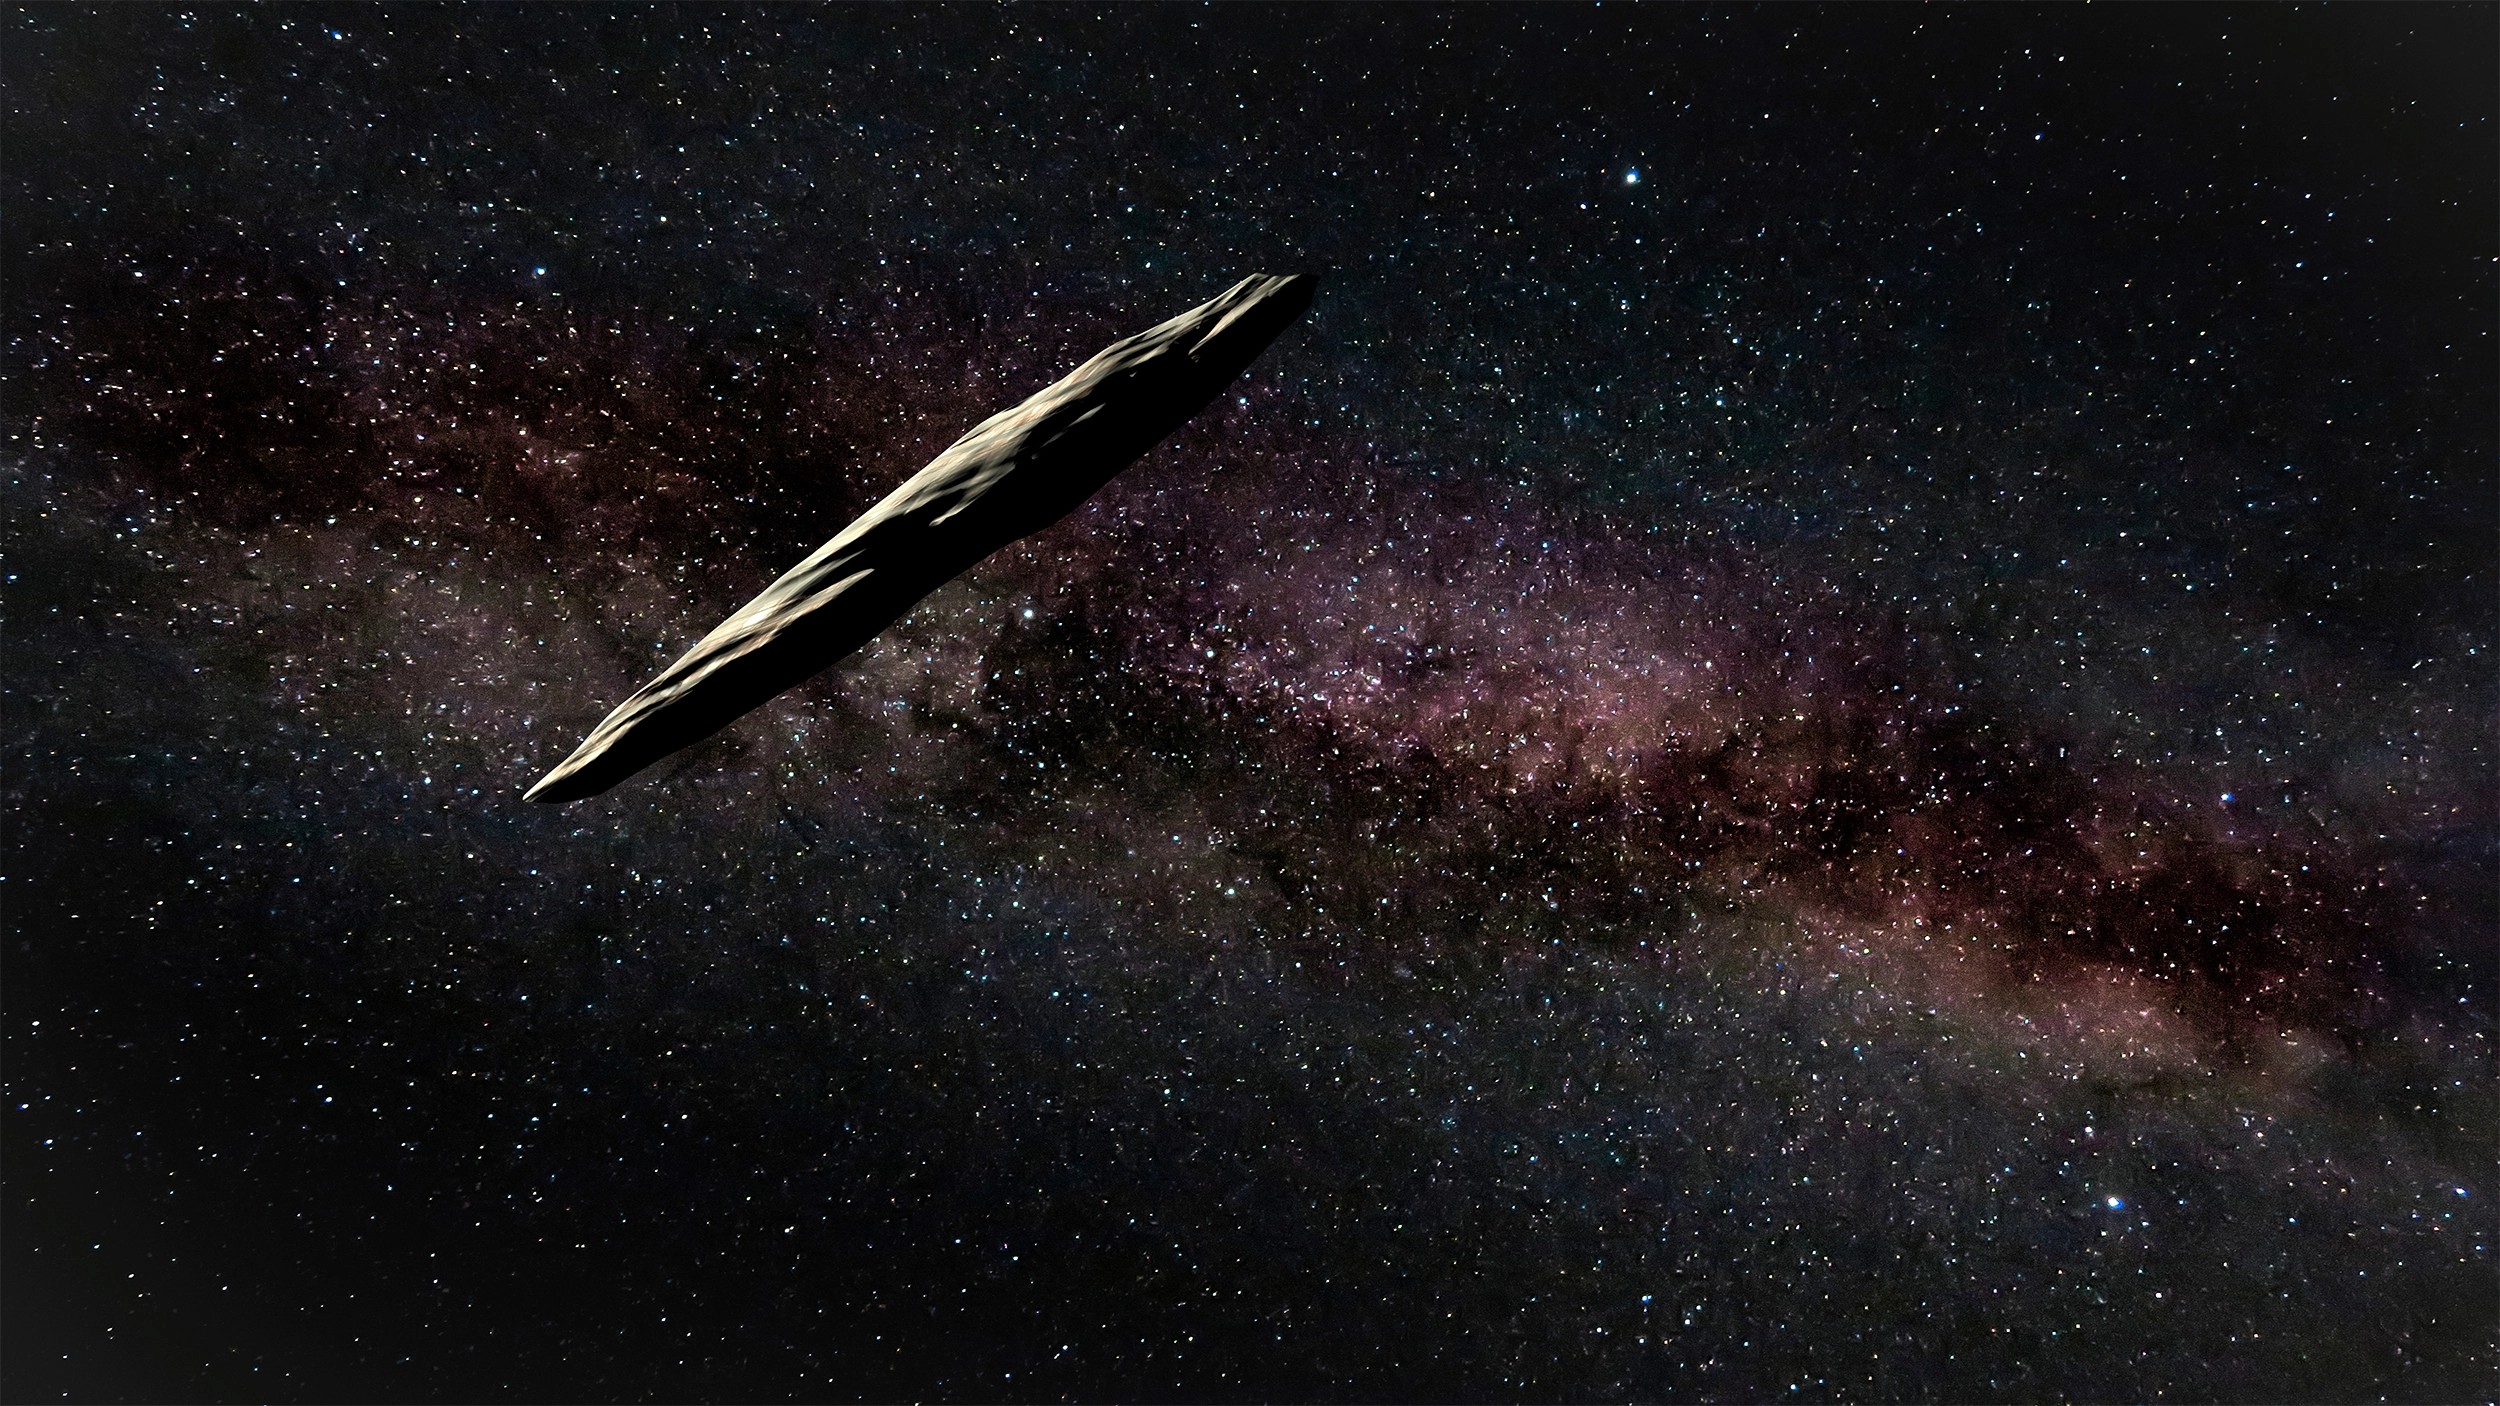 What is 'Oumuamua?